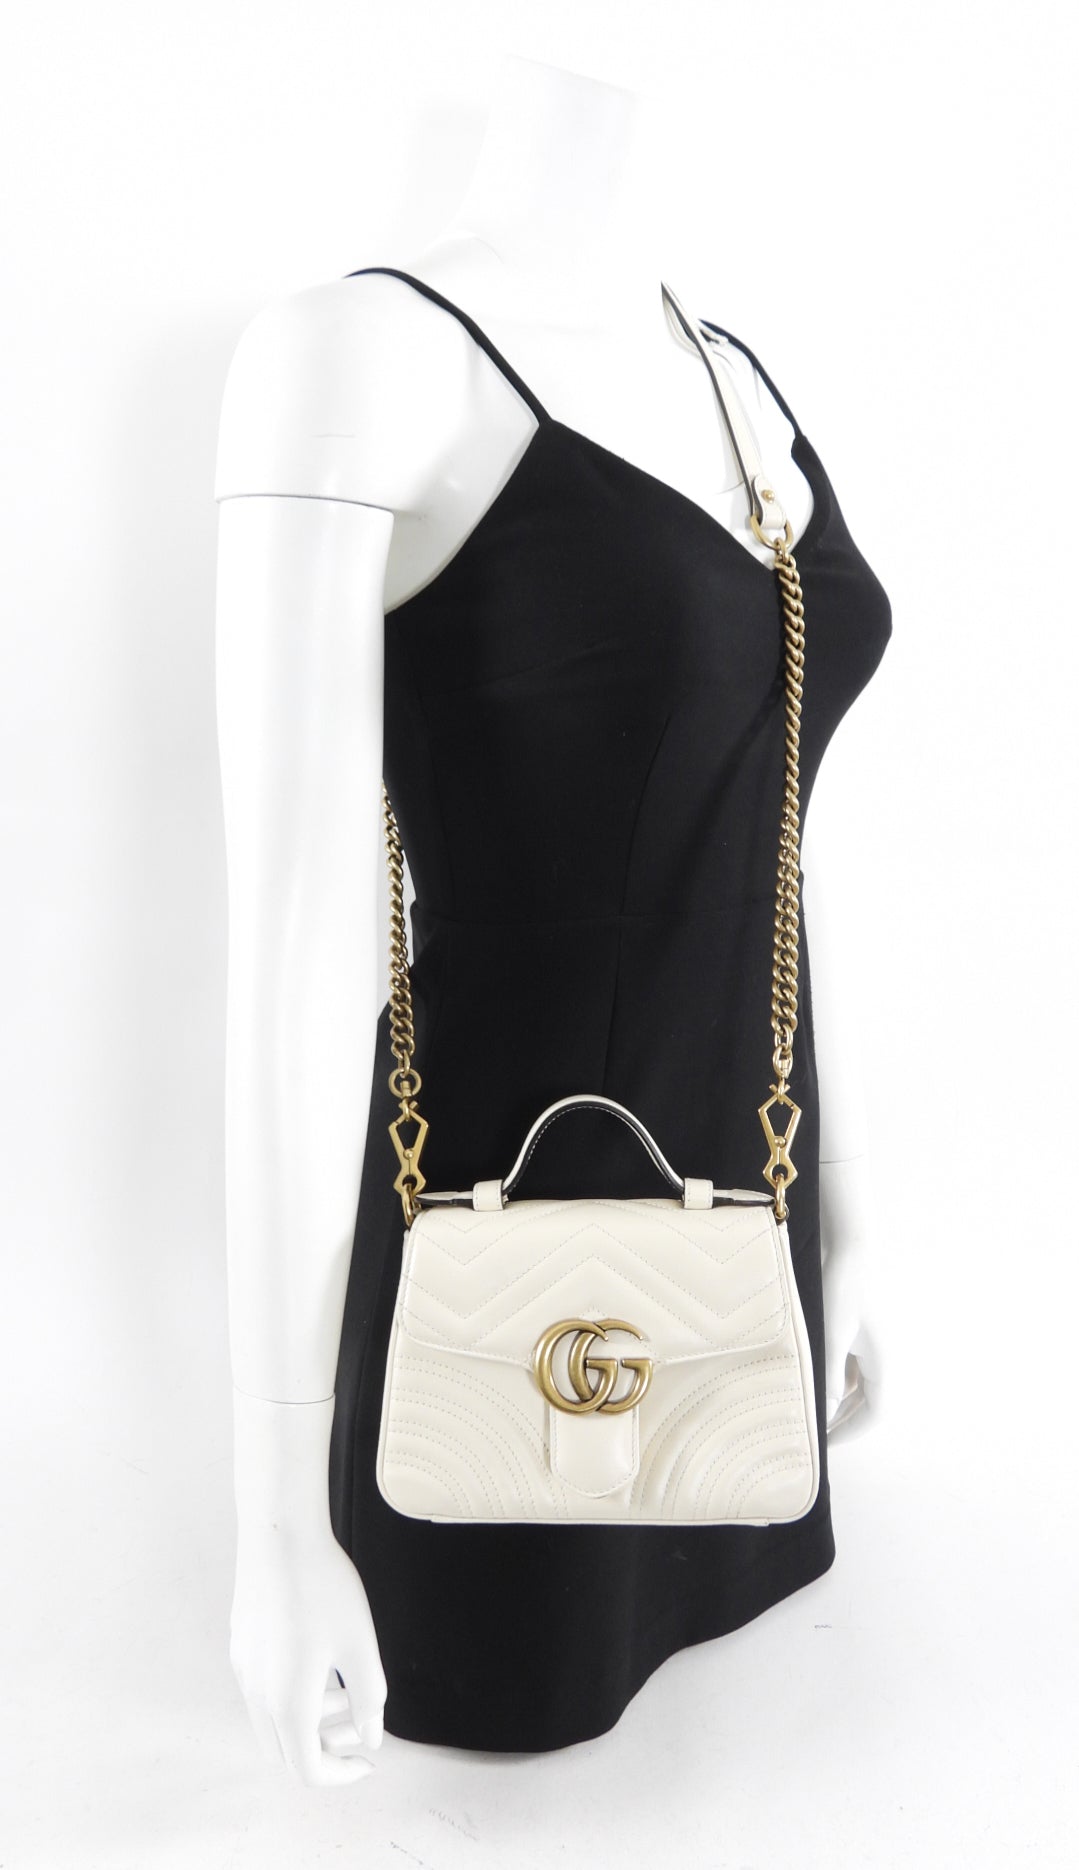 Gucci Marmont Ivory Leather Mini Top Handle Bag